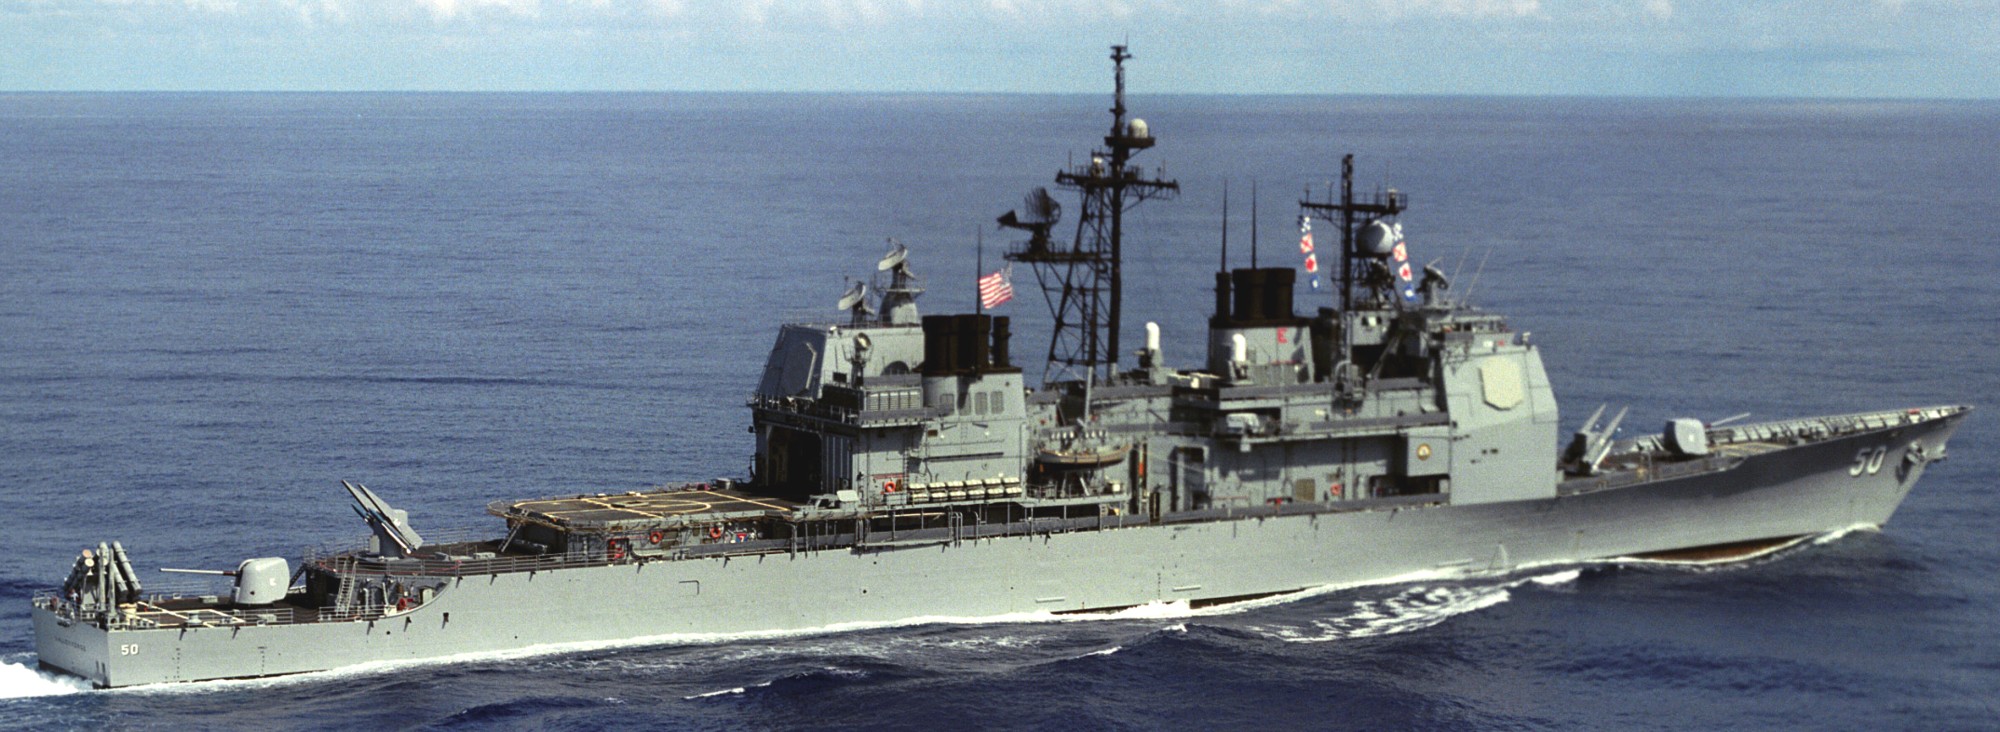 cg-50 uss valley forge ticonderoga class guided missile cruiser aegis us navy 37